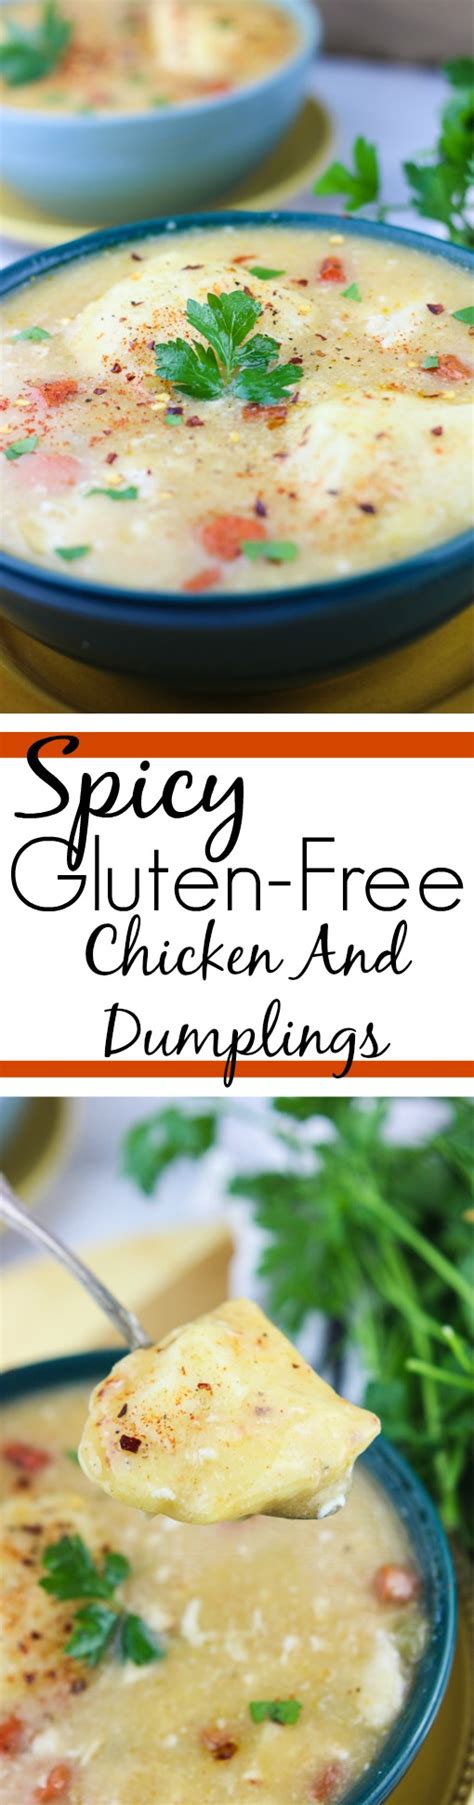 It's delicious and filling meal that can be on your table in less than 40 minutes. Gluten-Free Crock Pot Chicken Dumplings